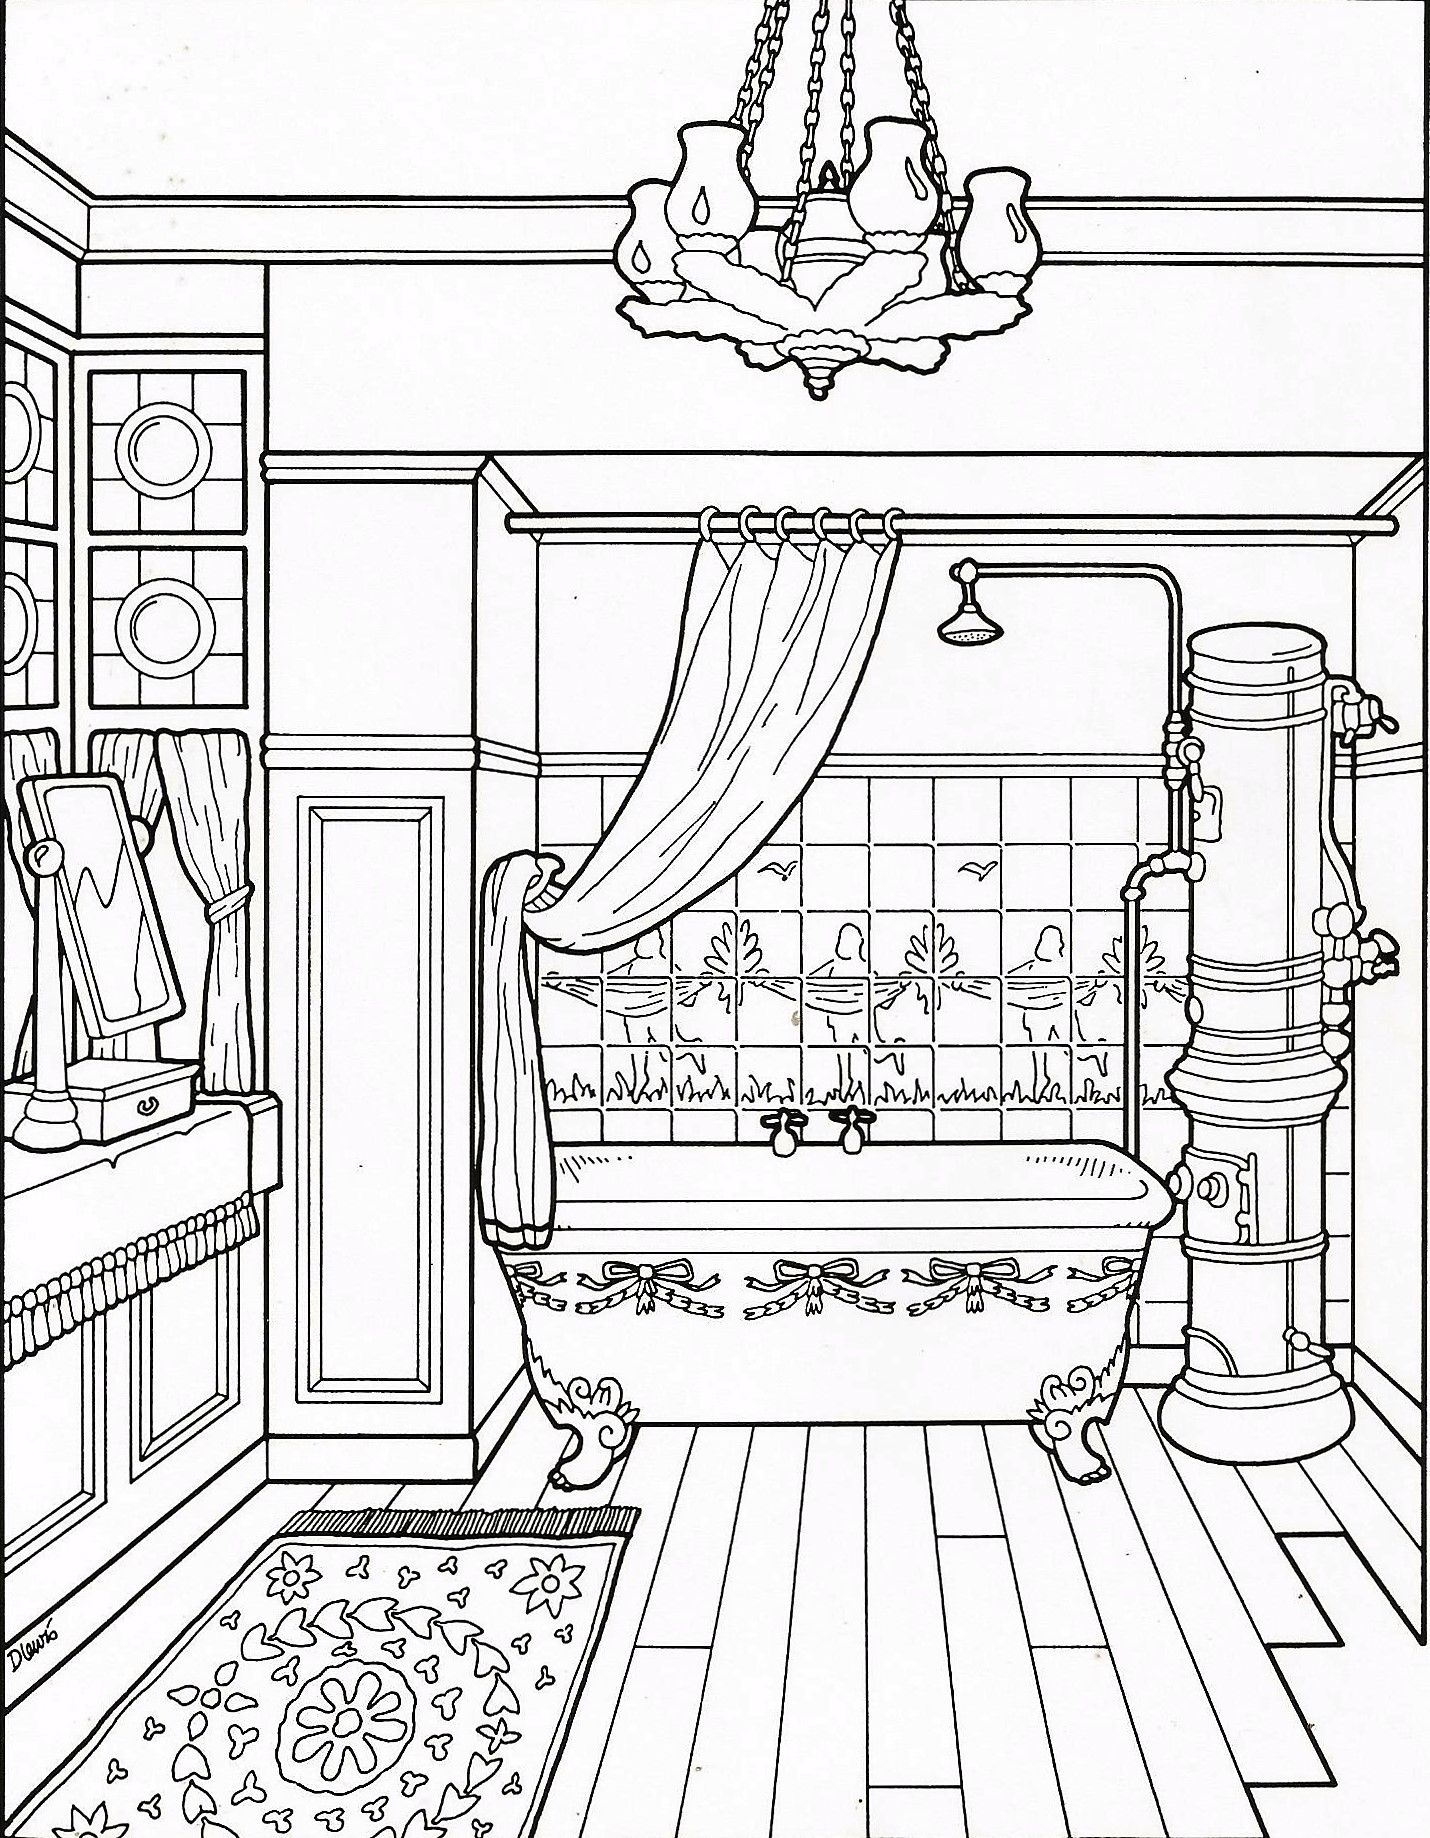 Bathroom coloring page | Coloring pages, Coloring books, Color